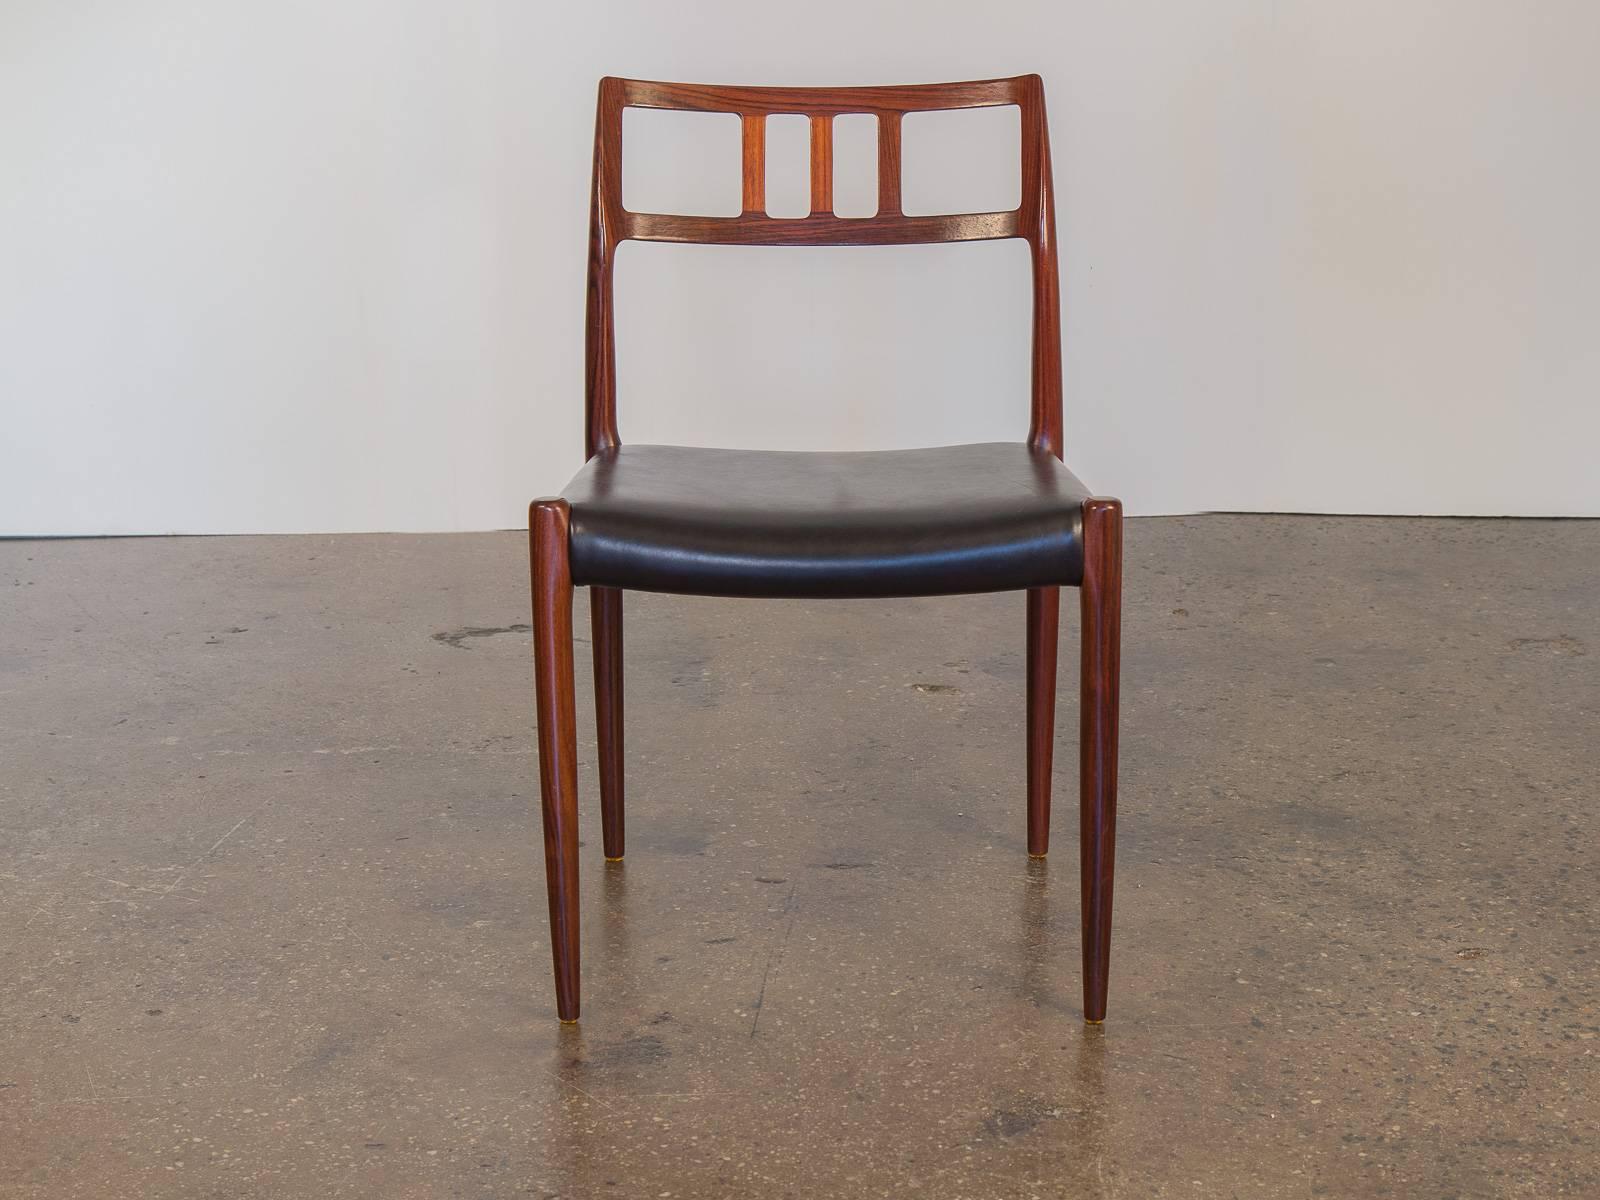 We have a rare, large quantity of twelve Møller Model 79 dining chairs by Niels O. Møller. Stunning, rosewood frames with distinct wood grain. Manufactured by J.L Møller in the late 1960s in Denmark. The black leather seats and rosewood chair frames